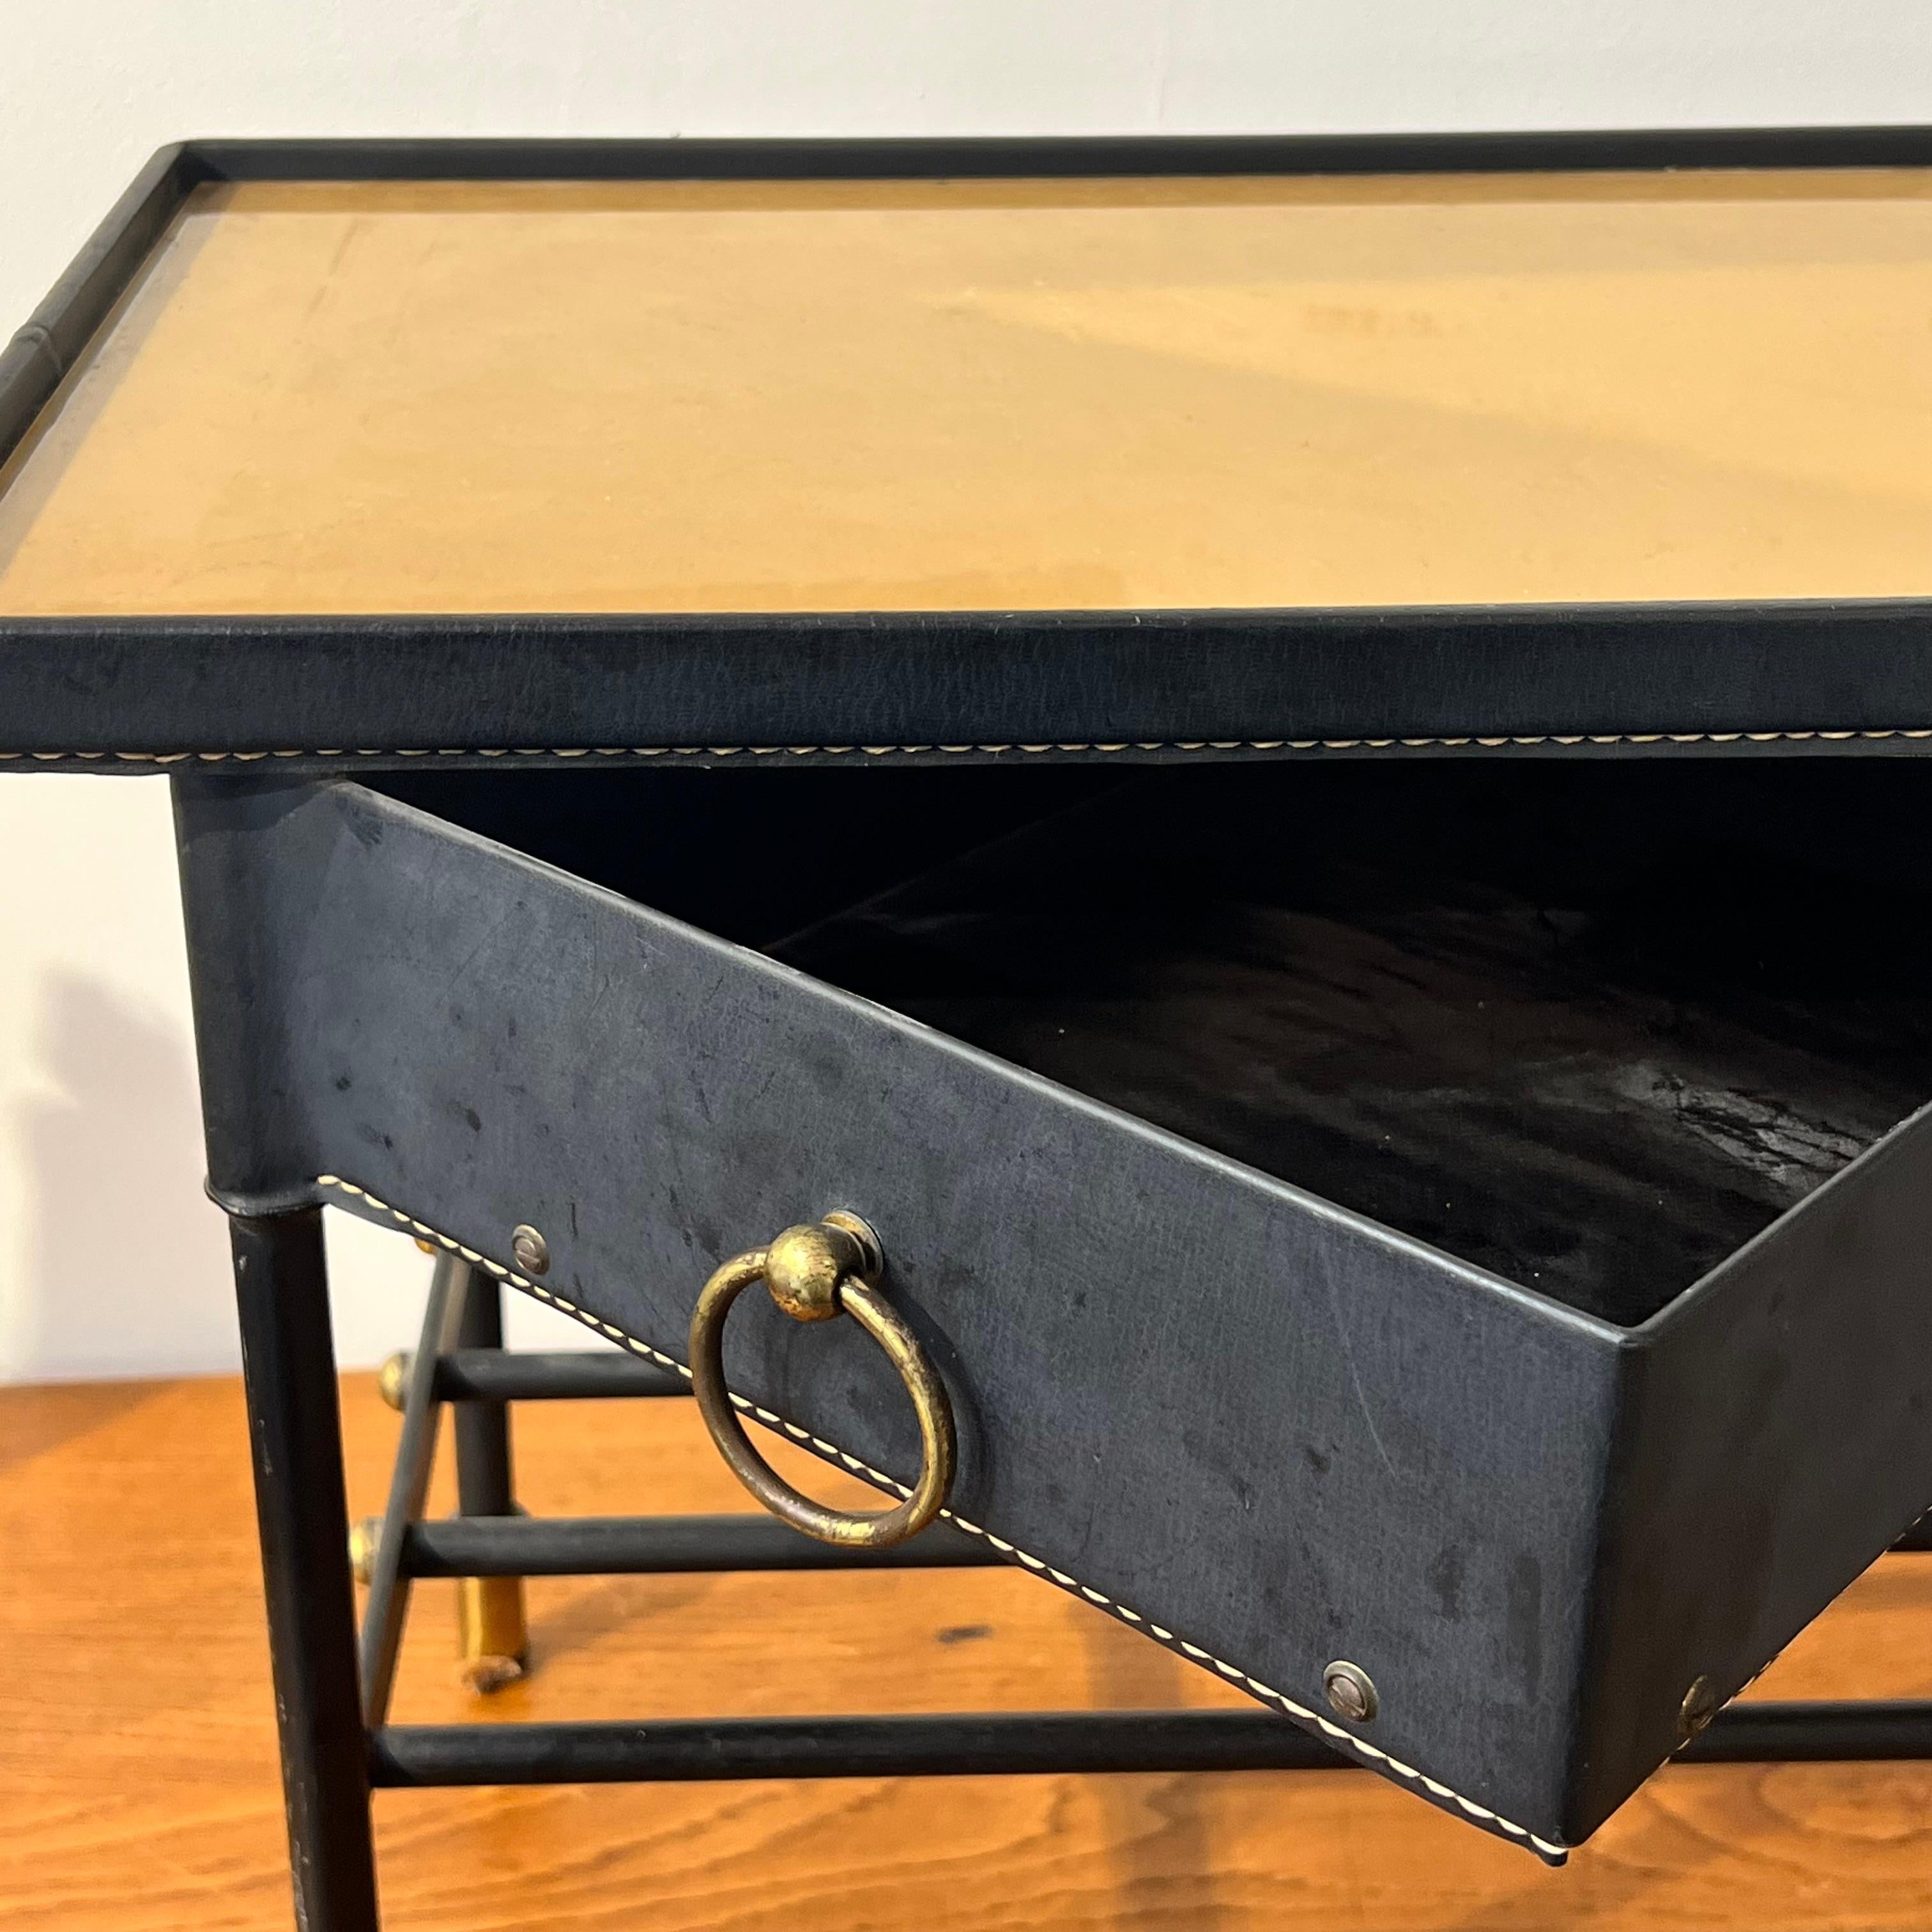 Jacques Adnet side table, leather metal and glass

Very good condition with original leather

Around 1950s

Adnet is known for his very elegant furnitures